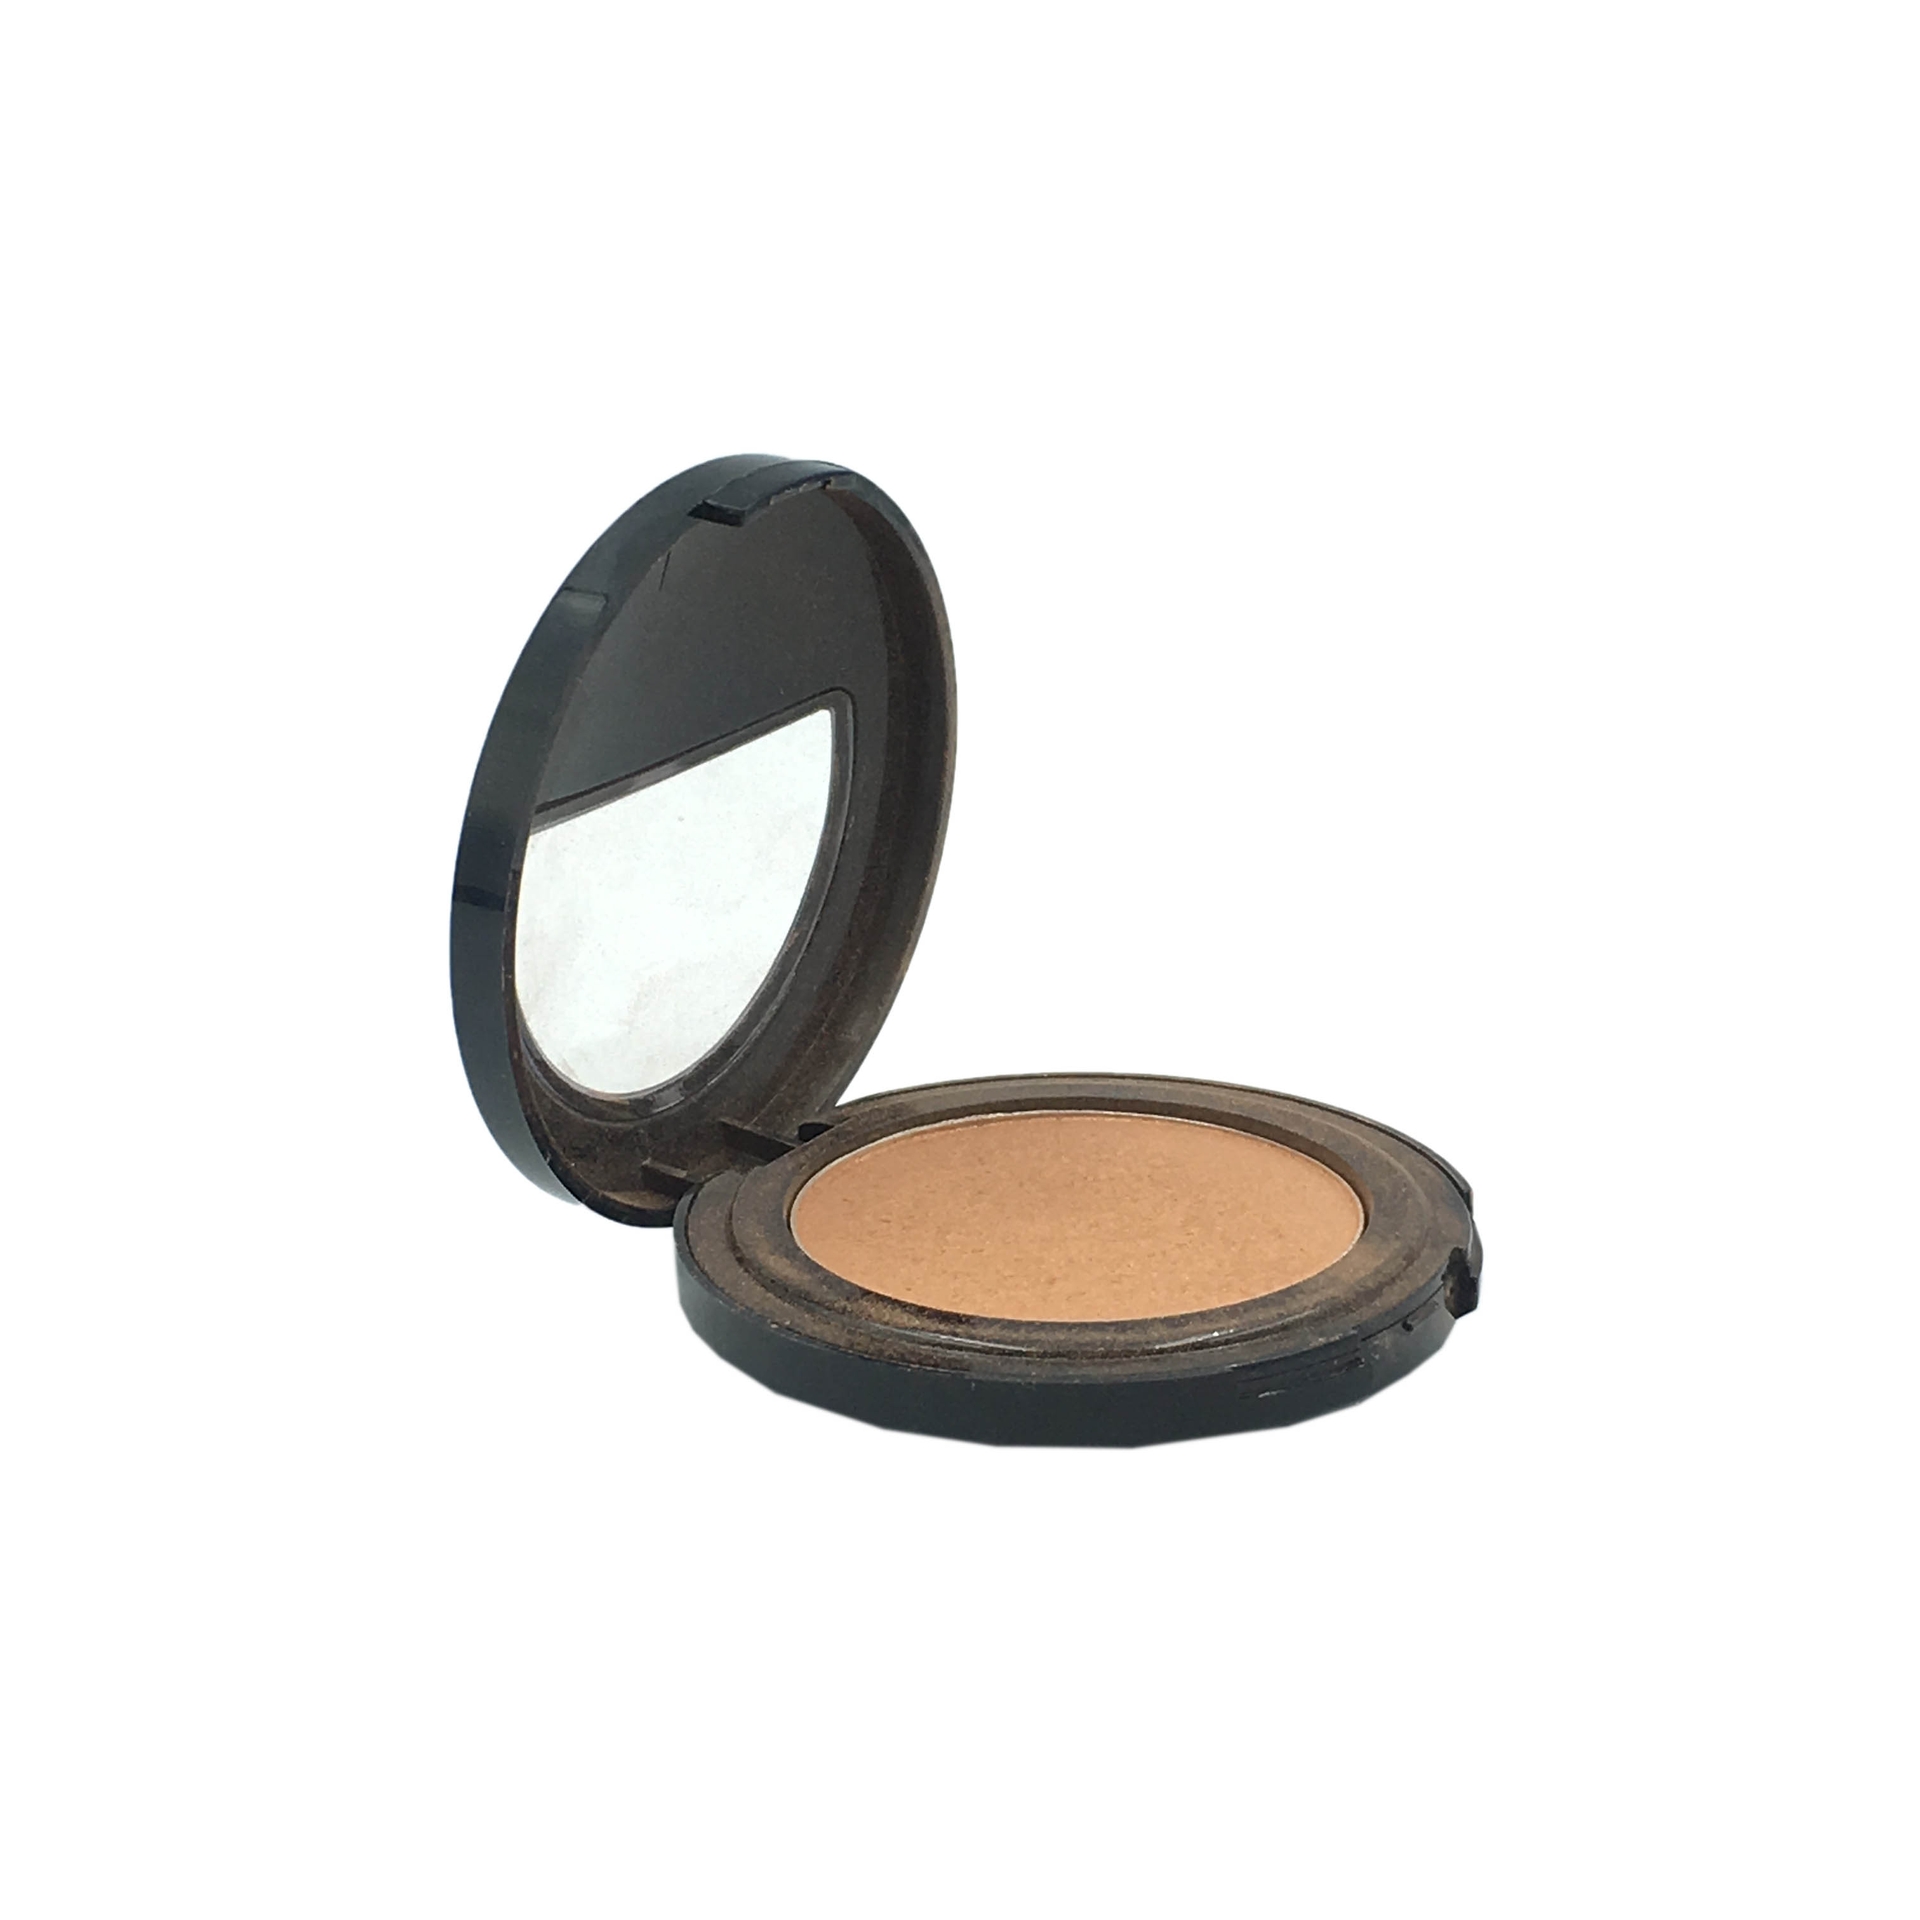 Private Collection Martinez Professionel Glam Blush On Shade 02 Bronze Reflection Faces